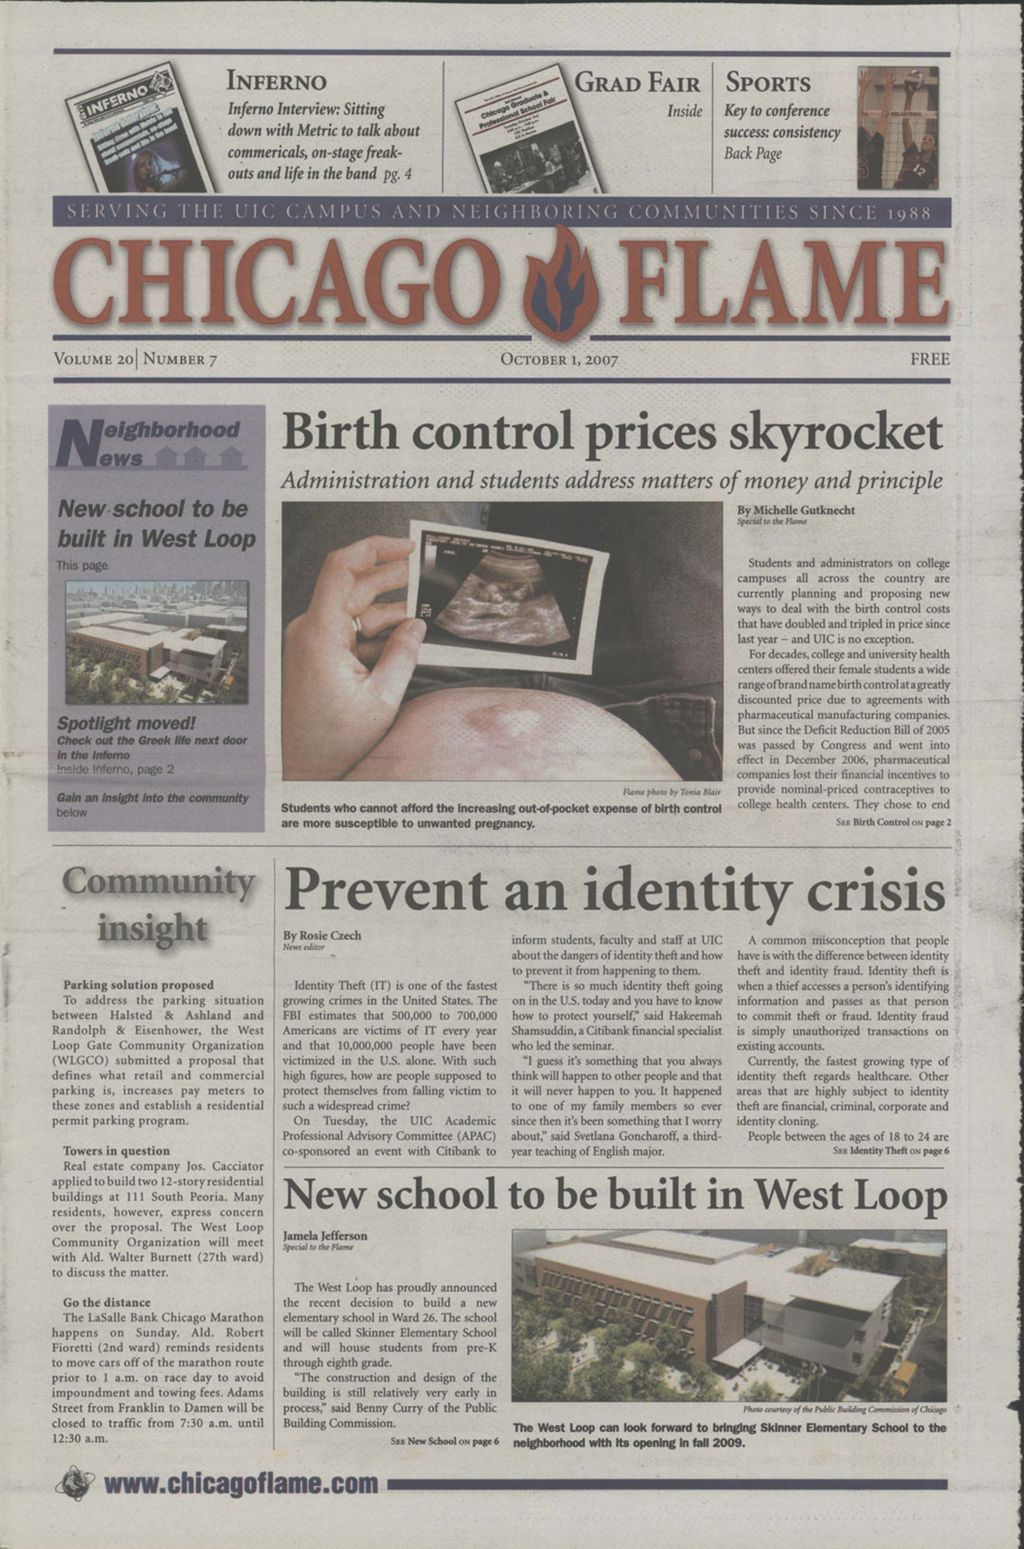 Miniature of Chicago Flame (October 1, 2007)